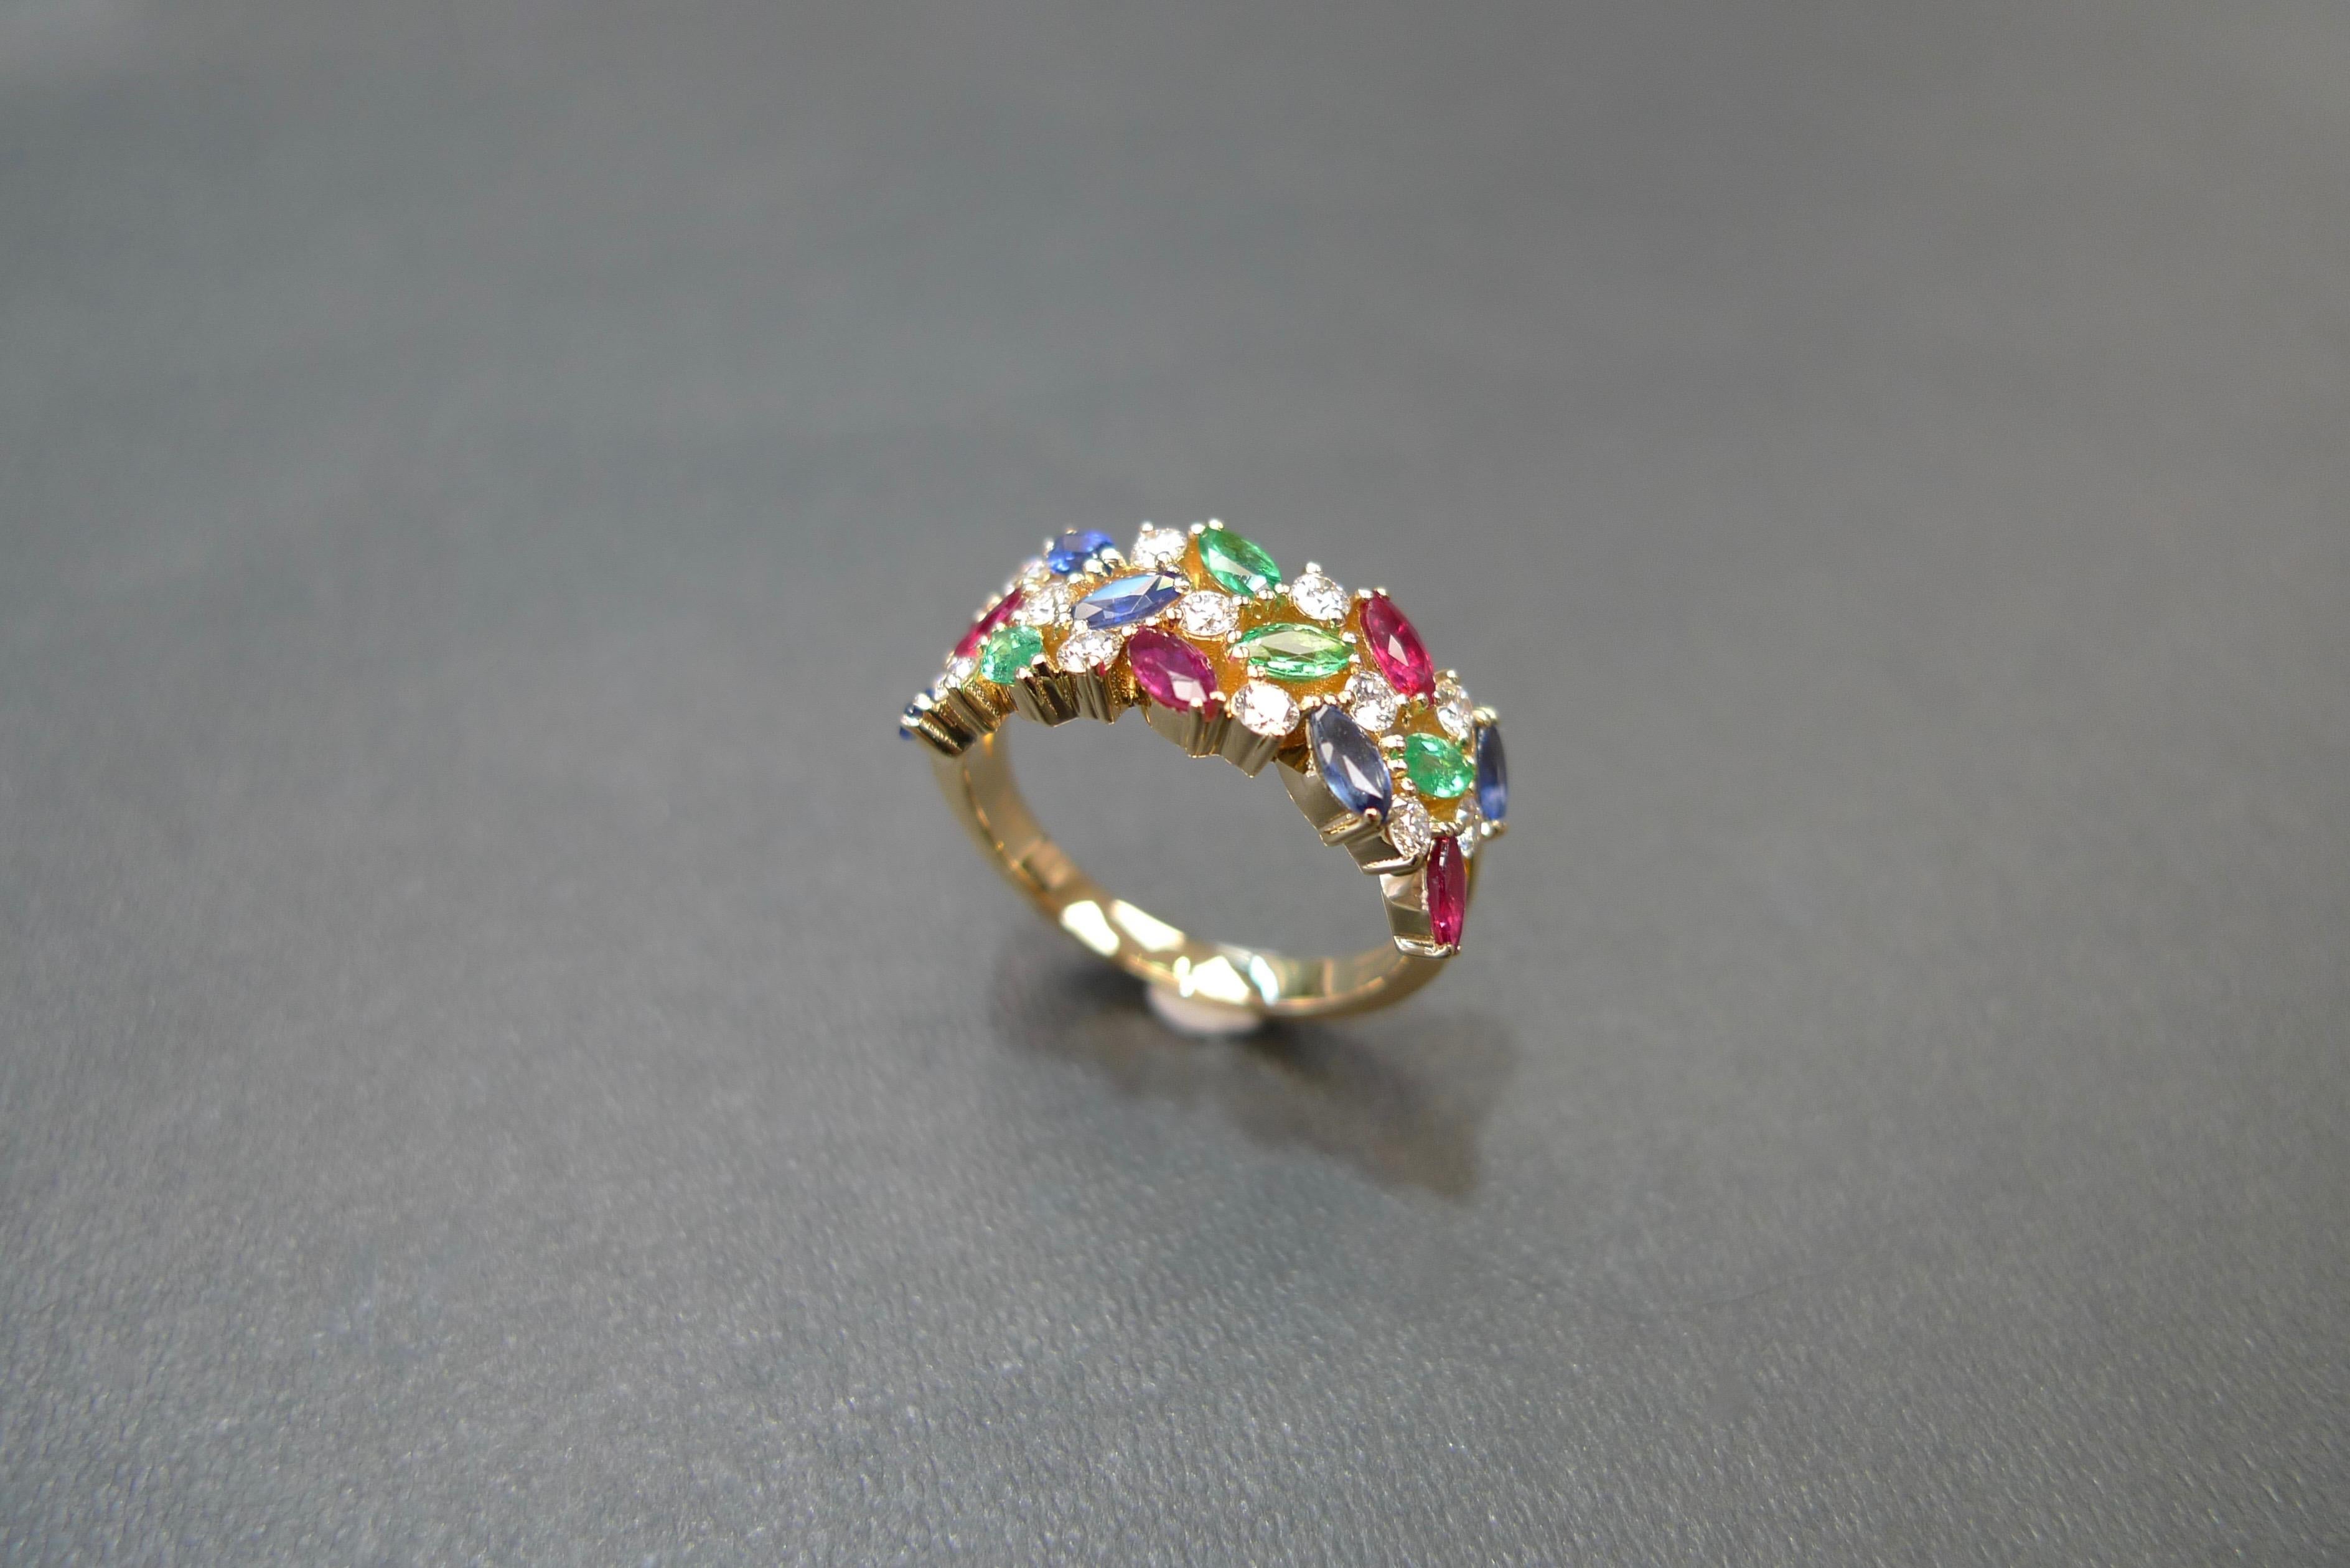 For Sale:  Vintage Style Wedding Ring Three Rows Blue Sapphire, Ruby, Emerald and Diamond  6